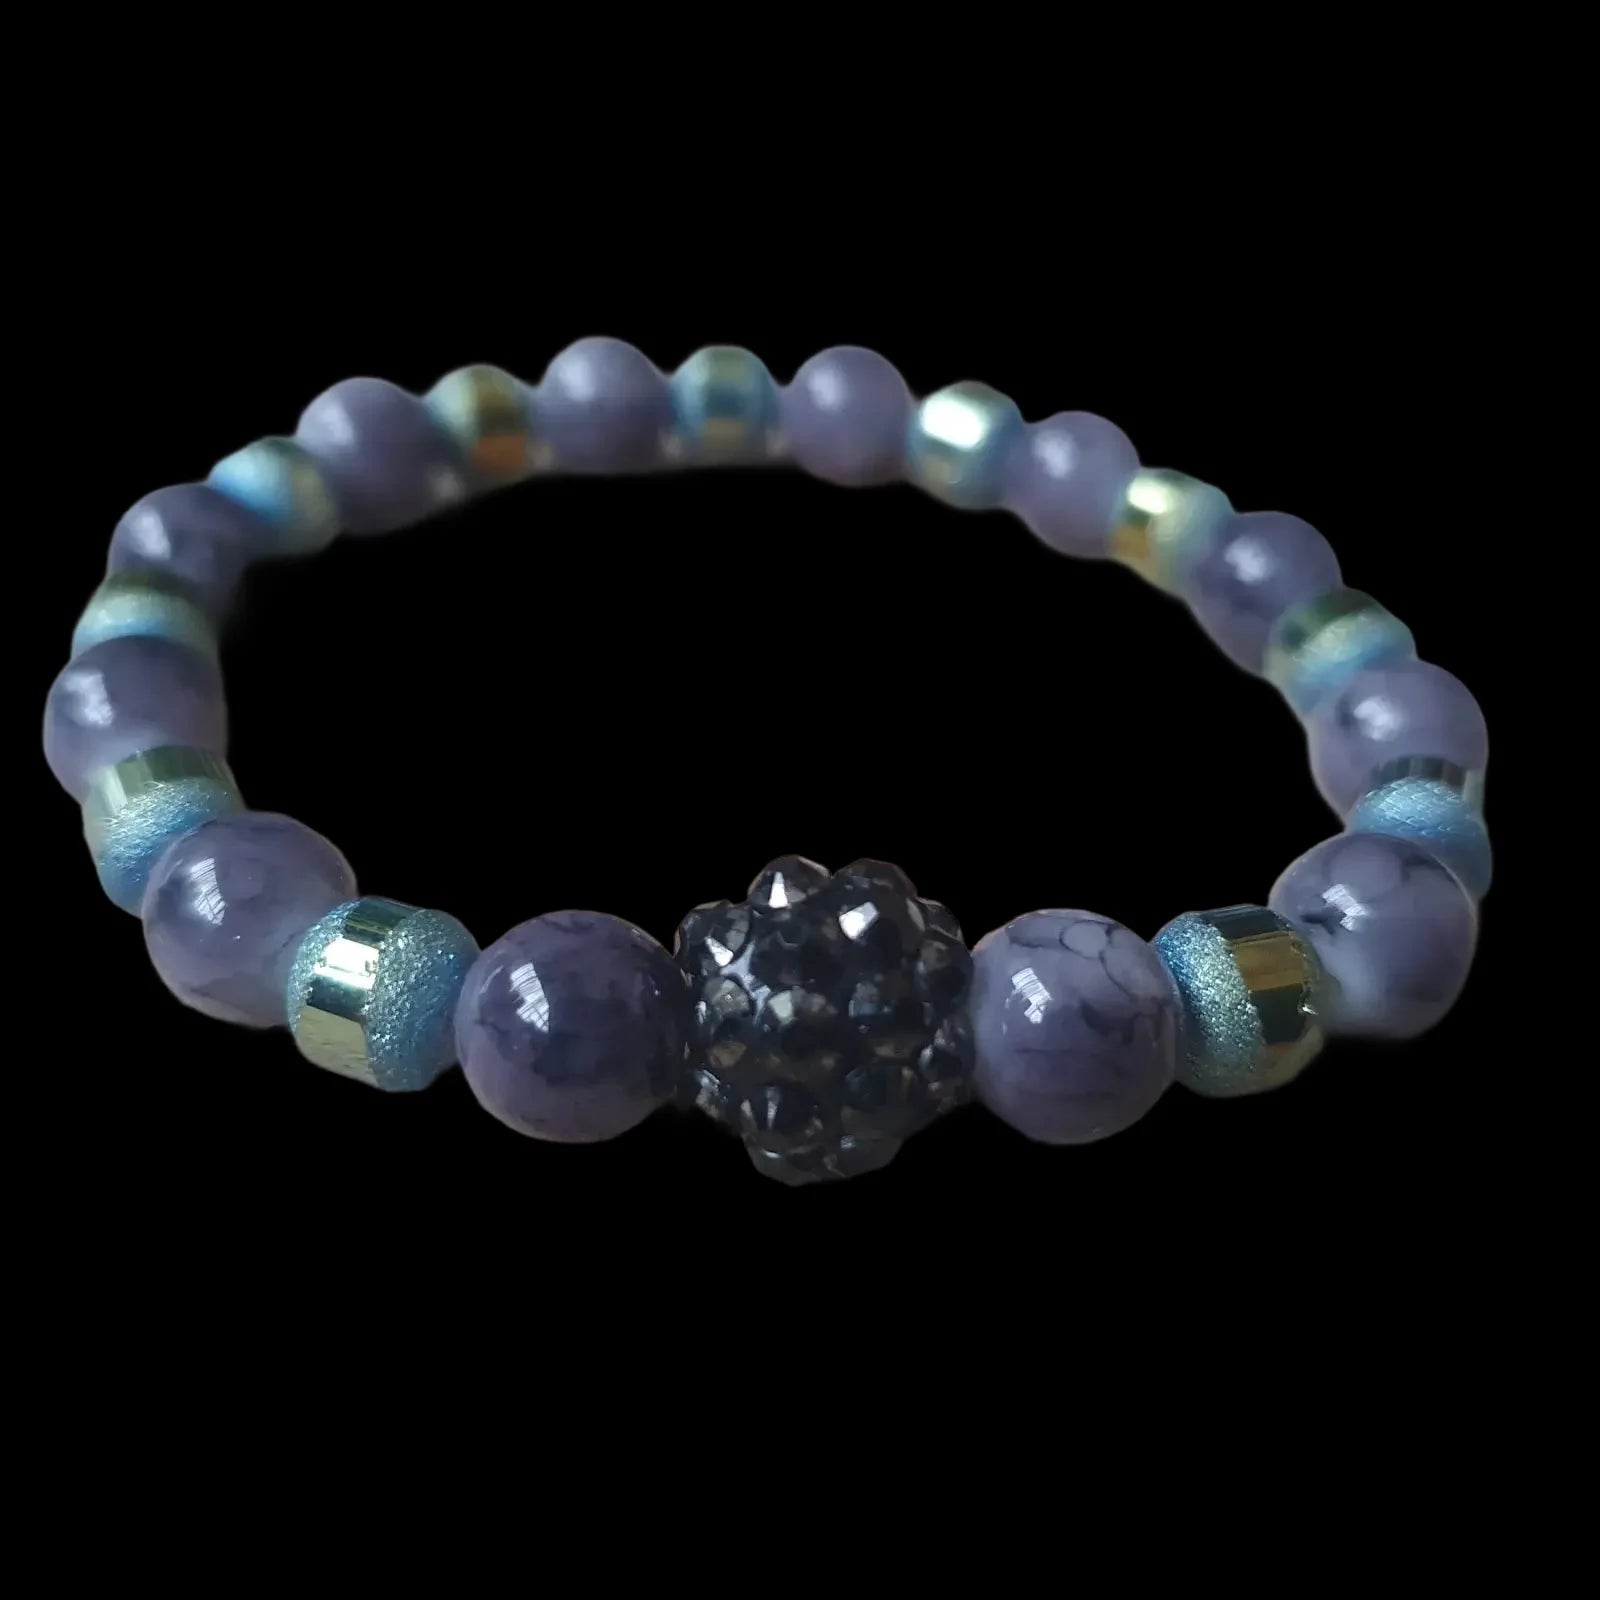 Unique Handmade Crafted Beaded Bracelet Marble Effect Gift